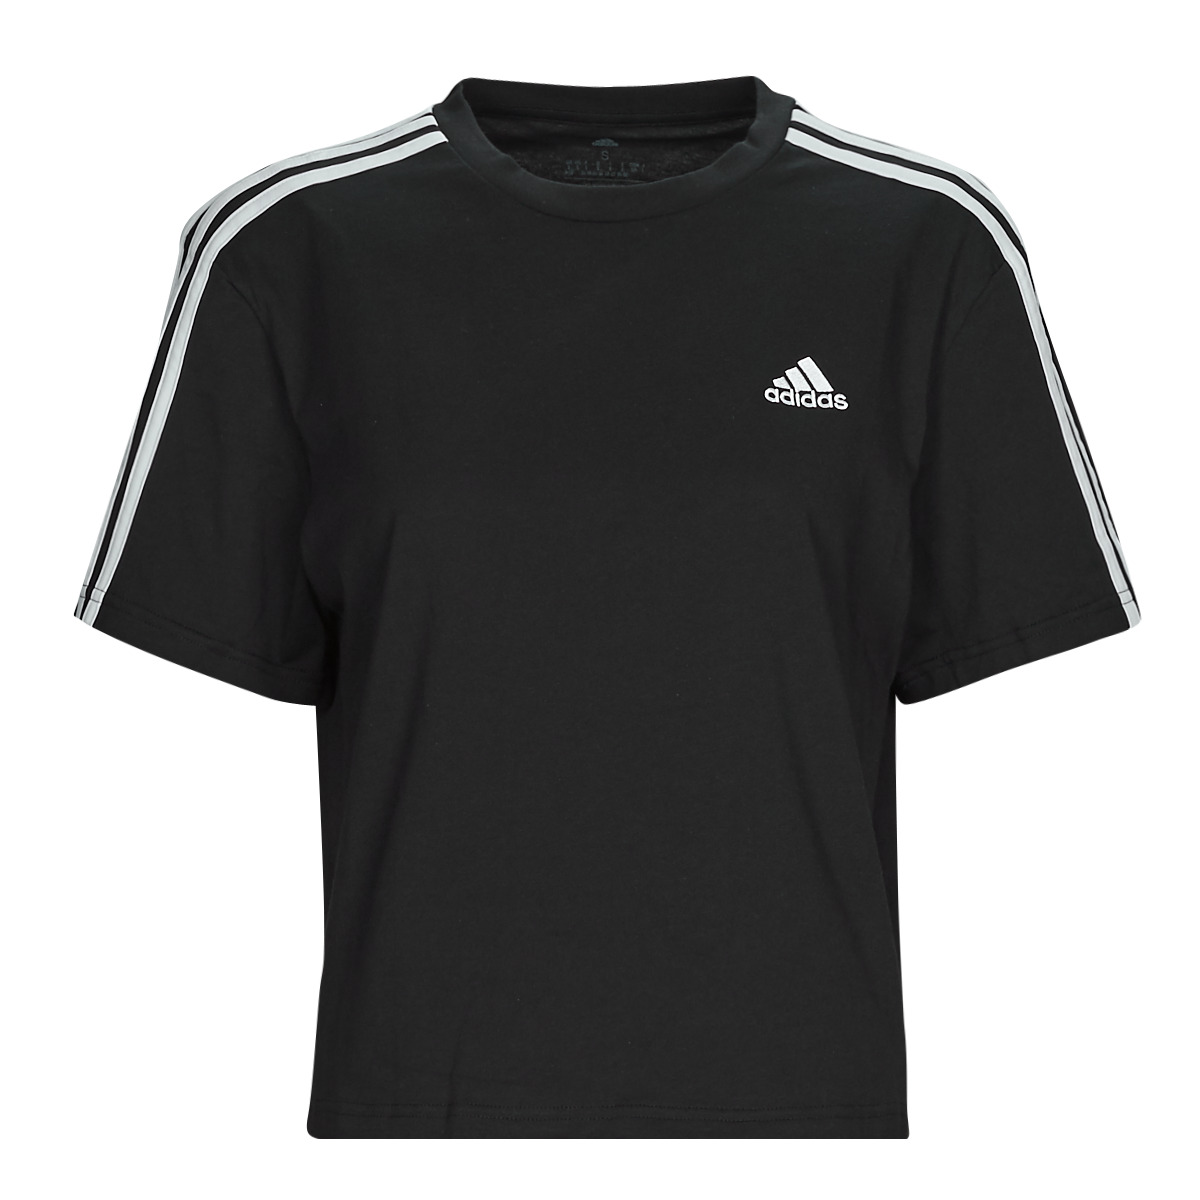 Adidas Sportswear Fast 3S 24,80 Spartoo delivery Women short-sleeved € - t-shirts Black | ! TOP Clothing CR - Europe